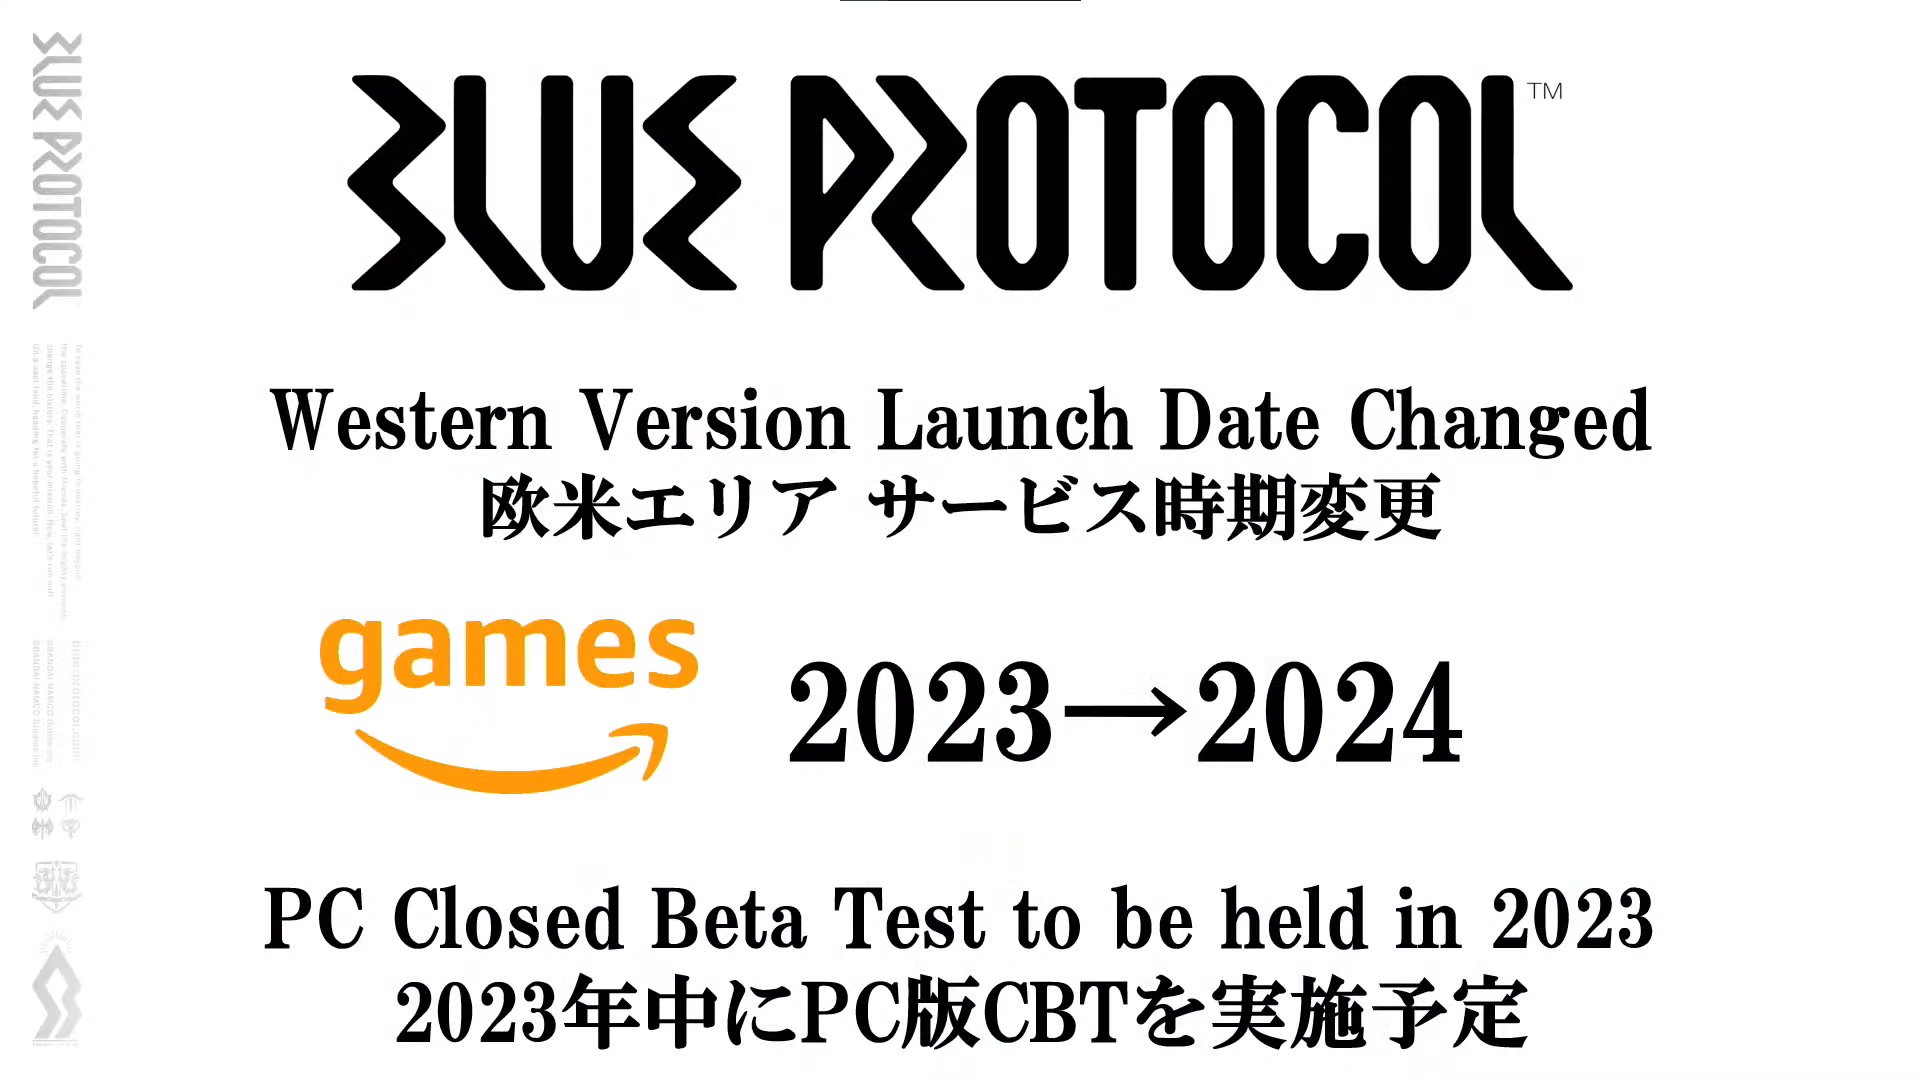 Blue Protocol 2023 Release Date Teased, Will be at TGA 2022 - Siliconera